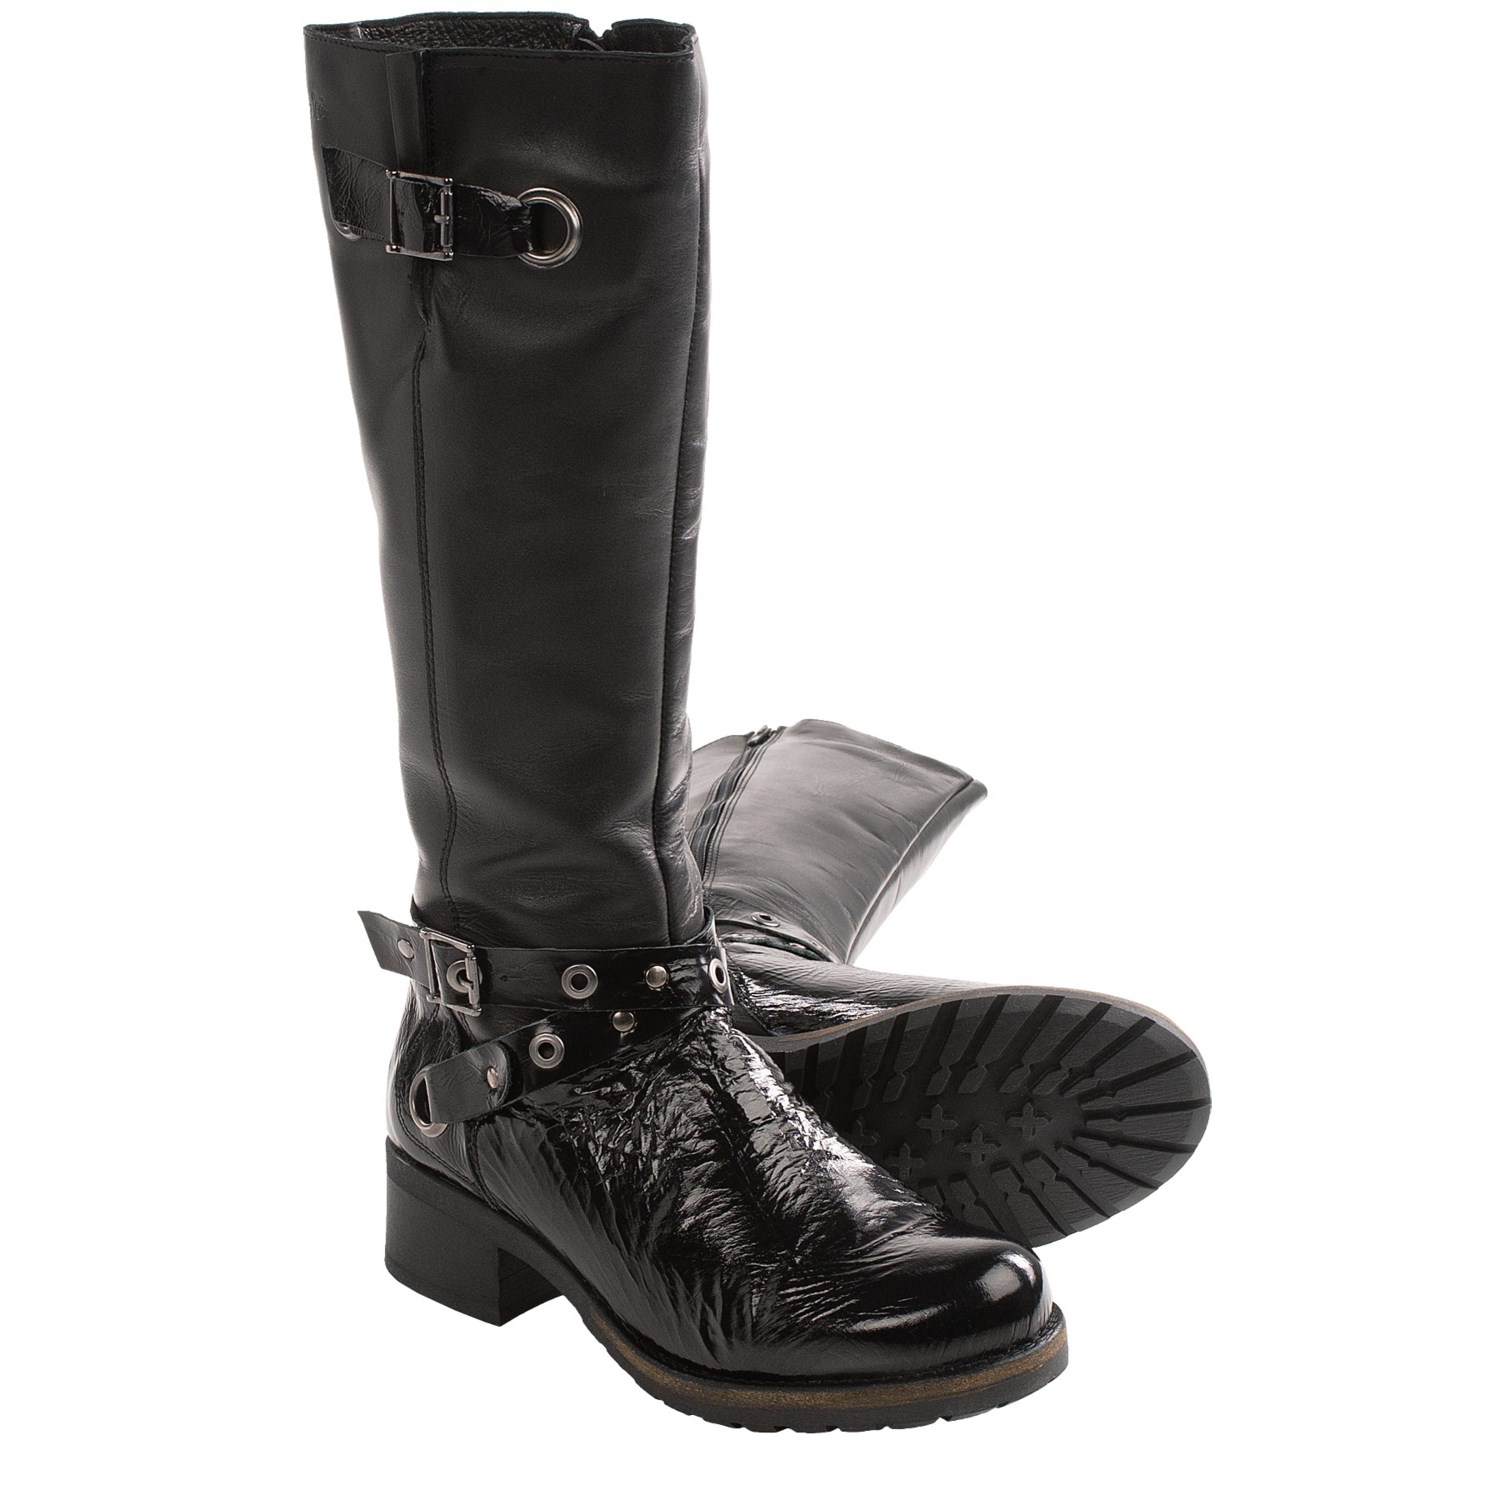 Bos. & Co. Boomer Biker Boots (For Women) in Black Crinkle Patent